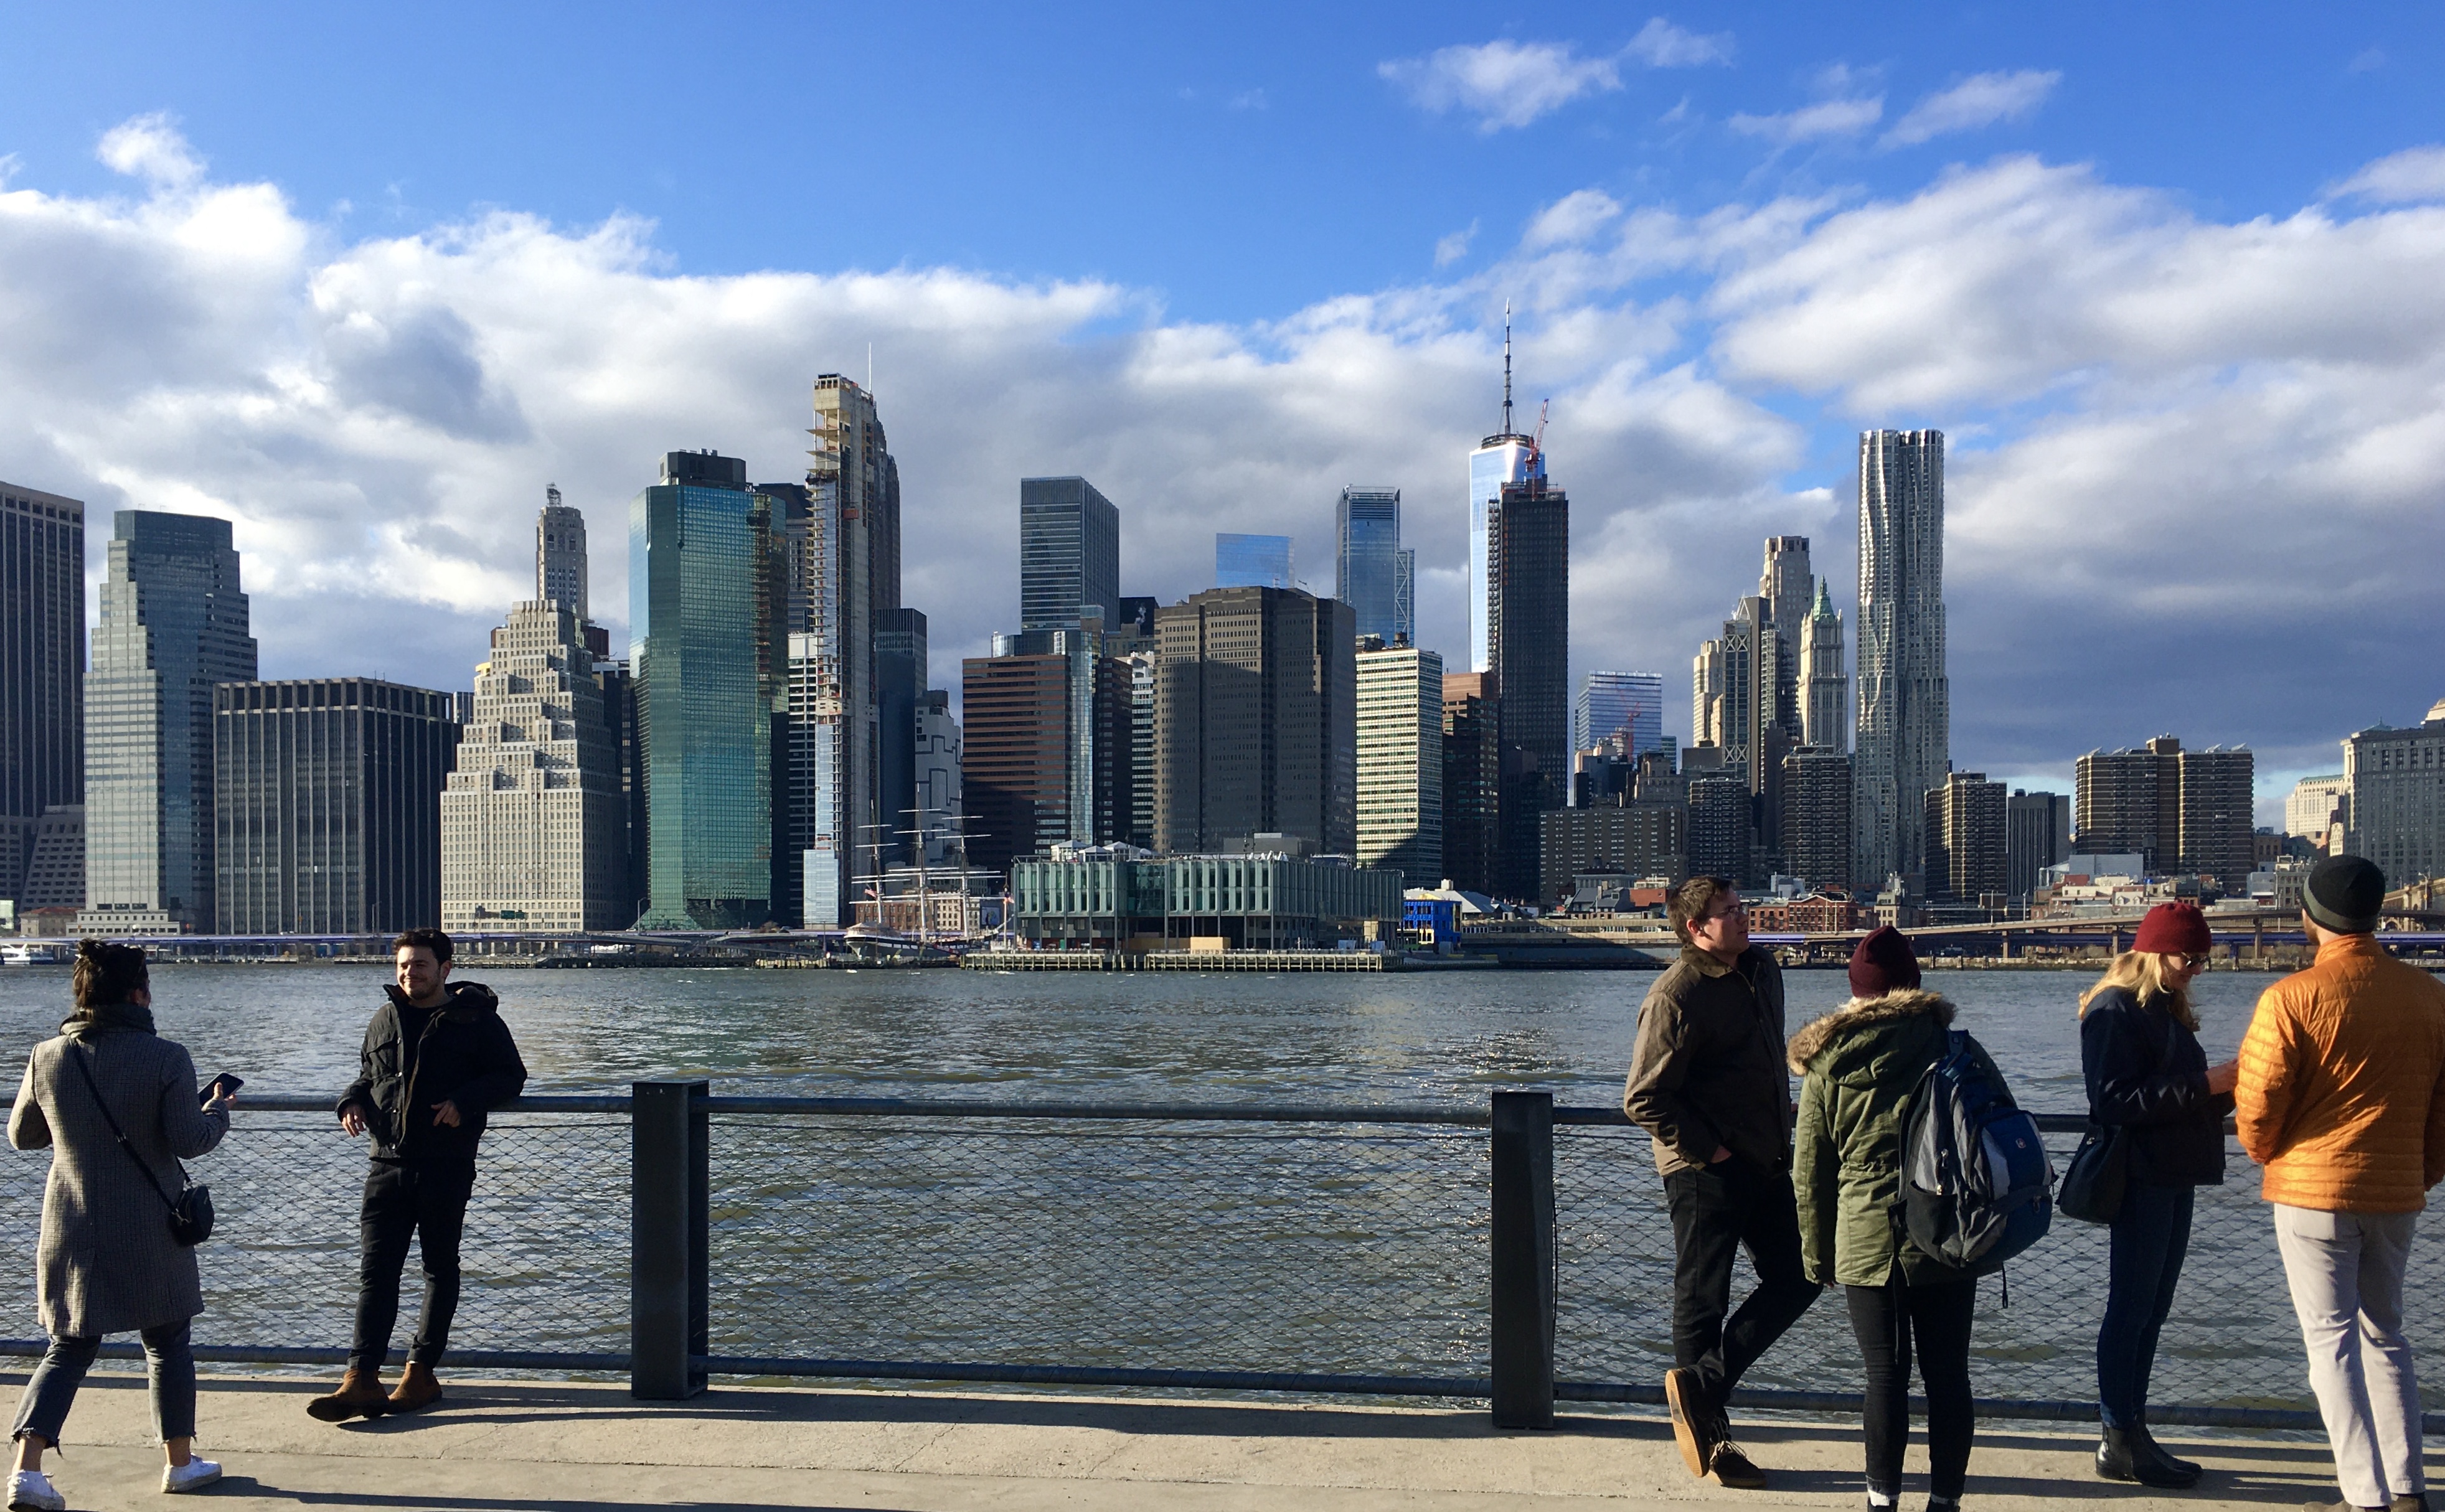 This end of Brooklyn Bridge Park’s Pier 1 is a popular place to pose for pictures. Photo: Lore Croghan/Brooklyn Eagle